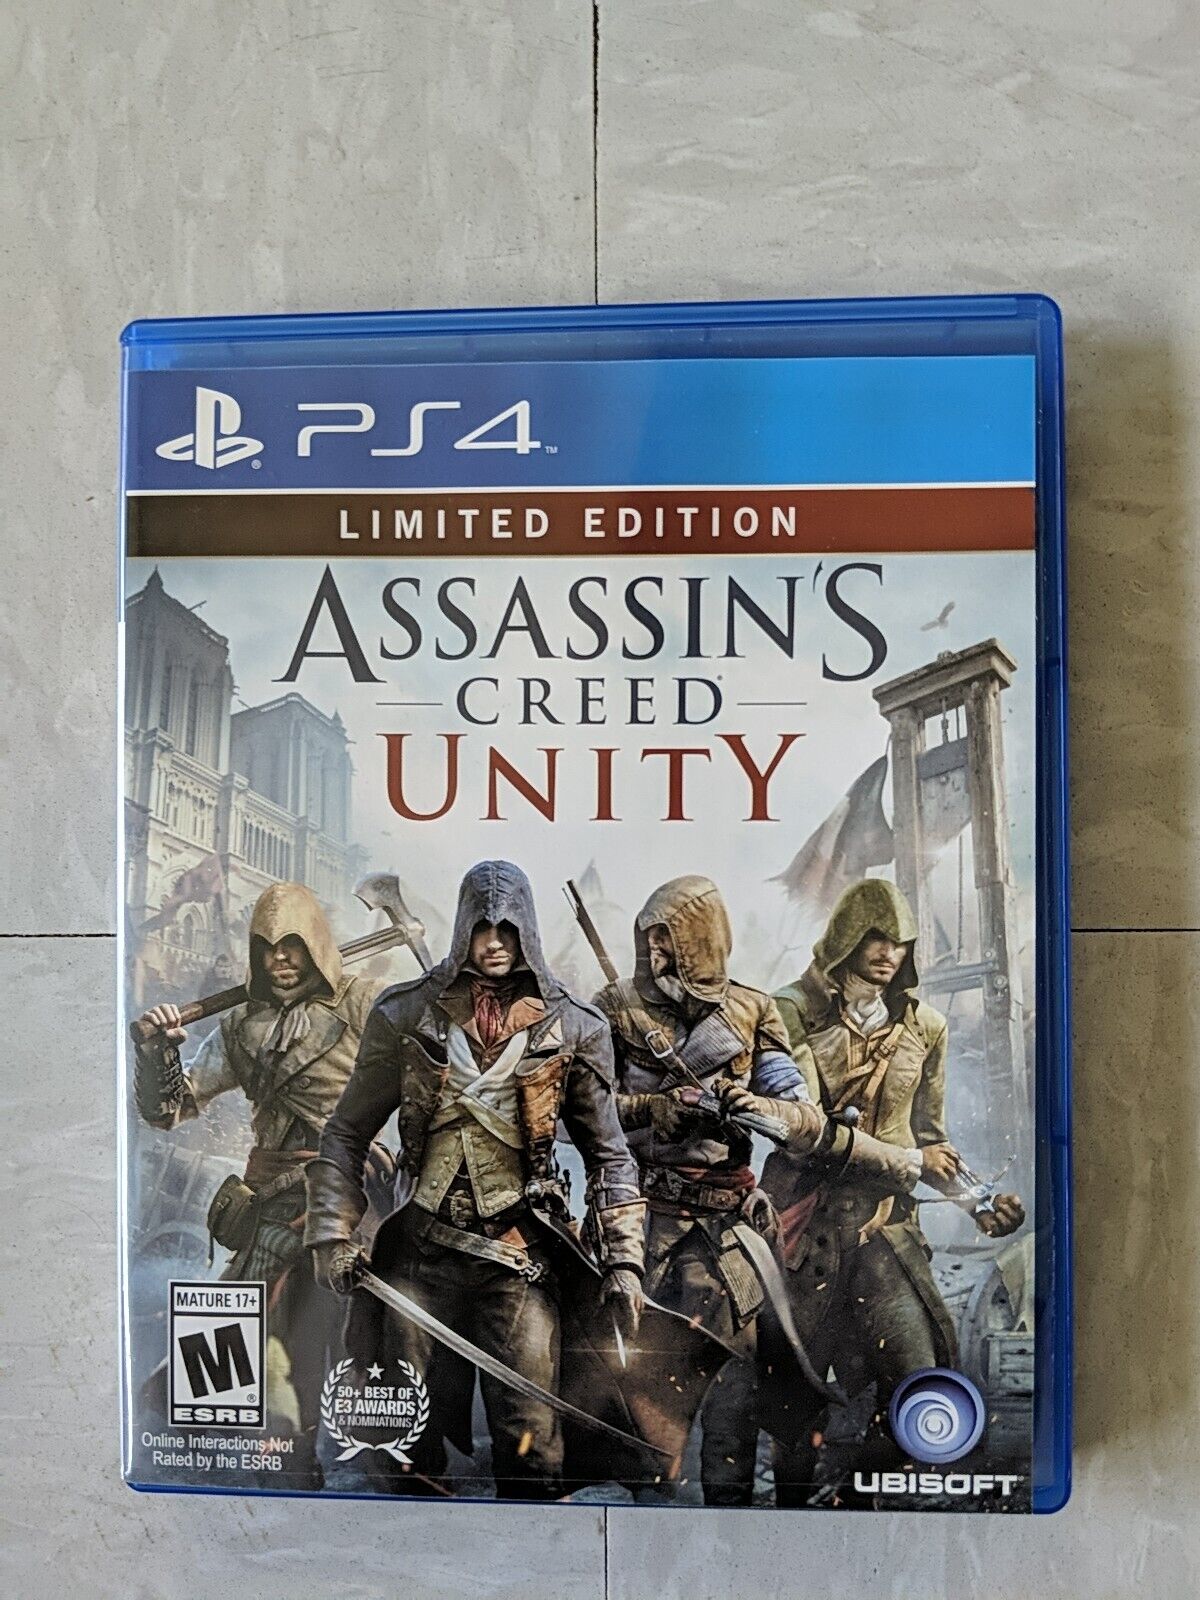 Assassin's Creed: Unity - Limited Edition - Sony PlayStation 4 - PS4 - 2014